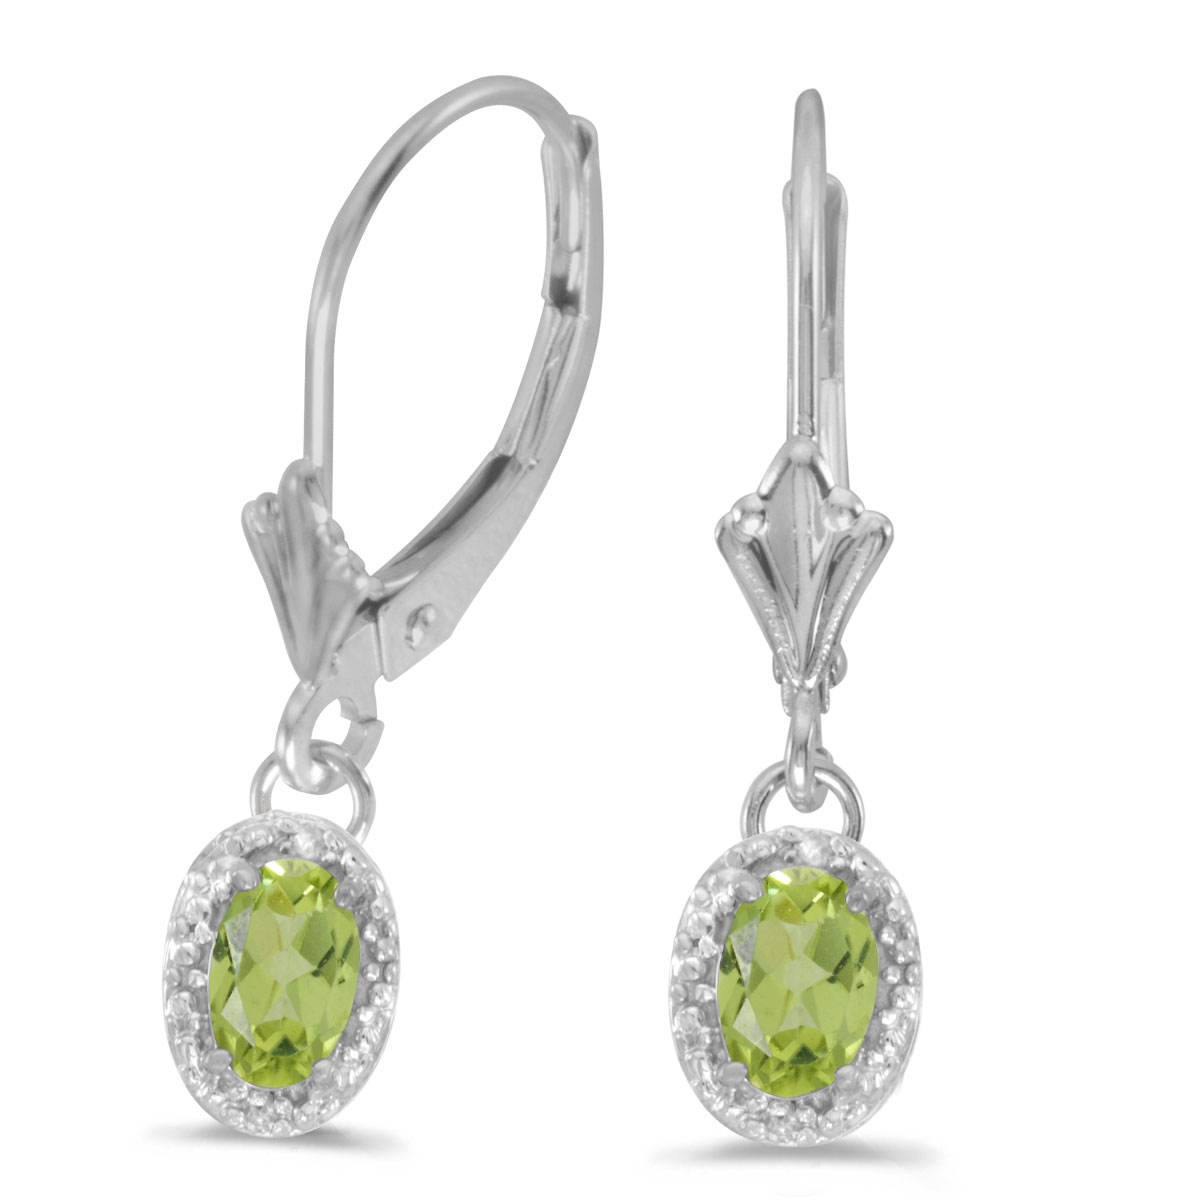 Beautiful 10k white gold leverback earrings with pretty 6x4 mm peridots complemented with bright diamonds.